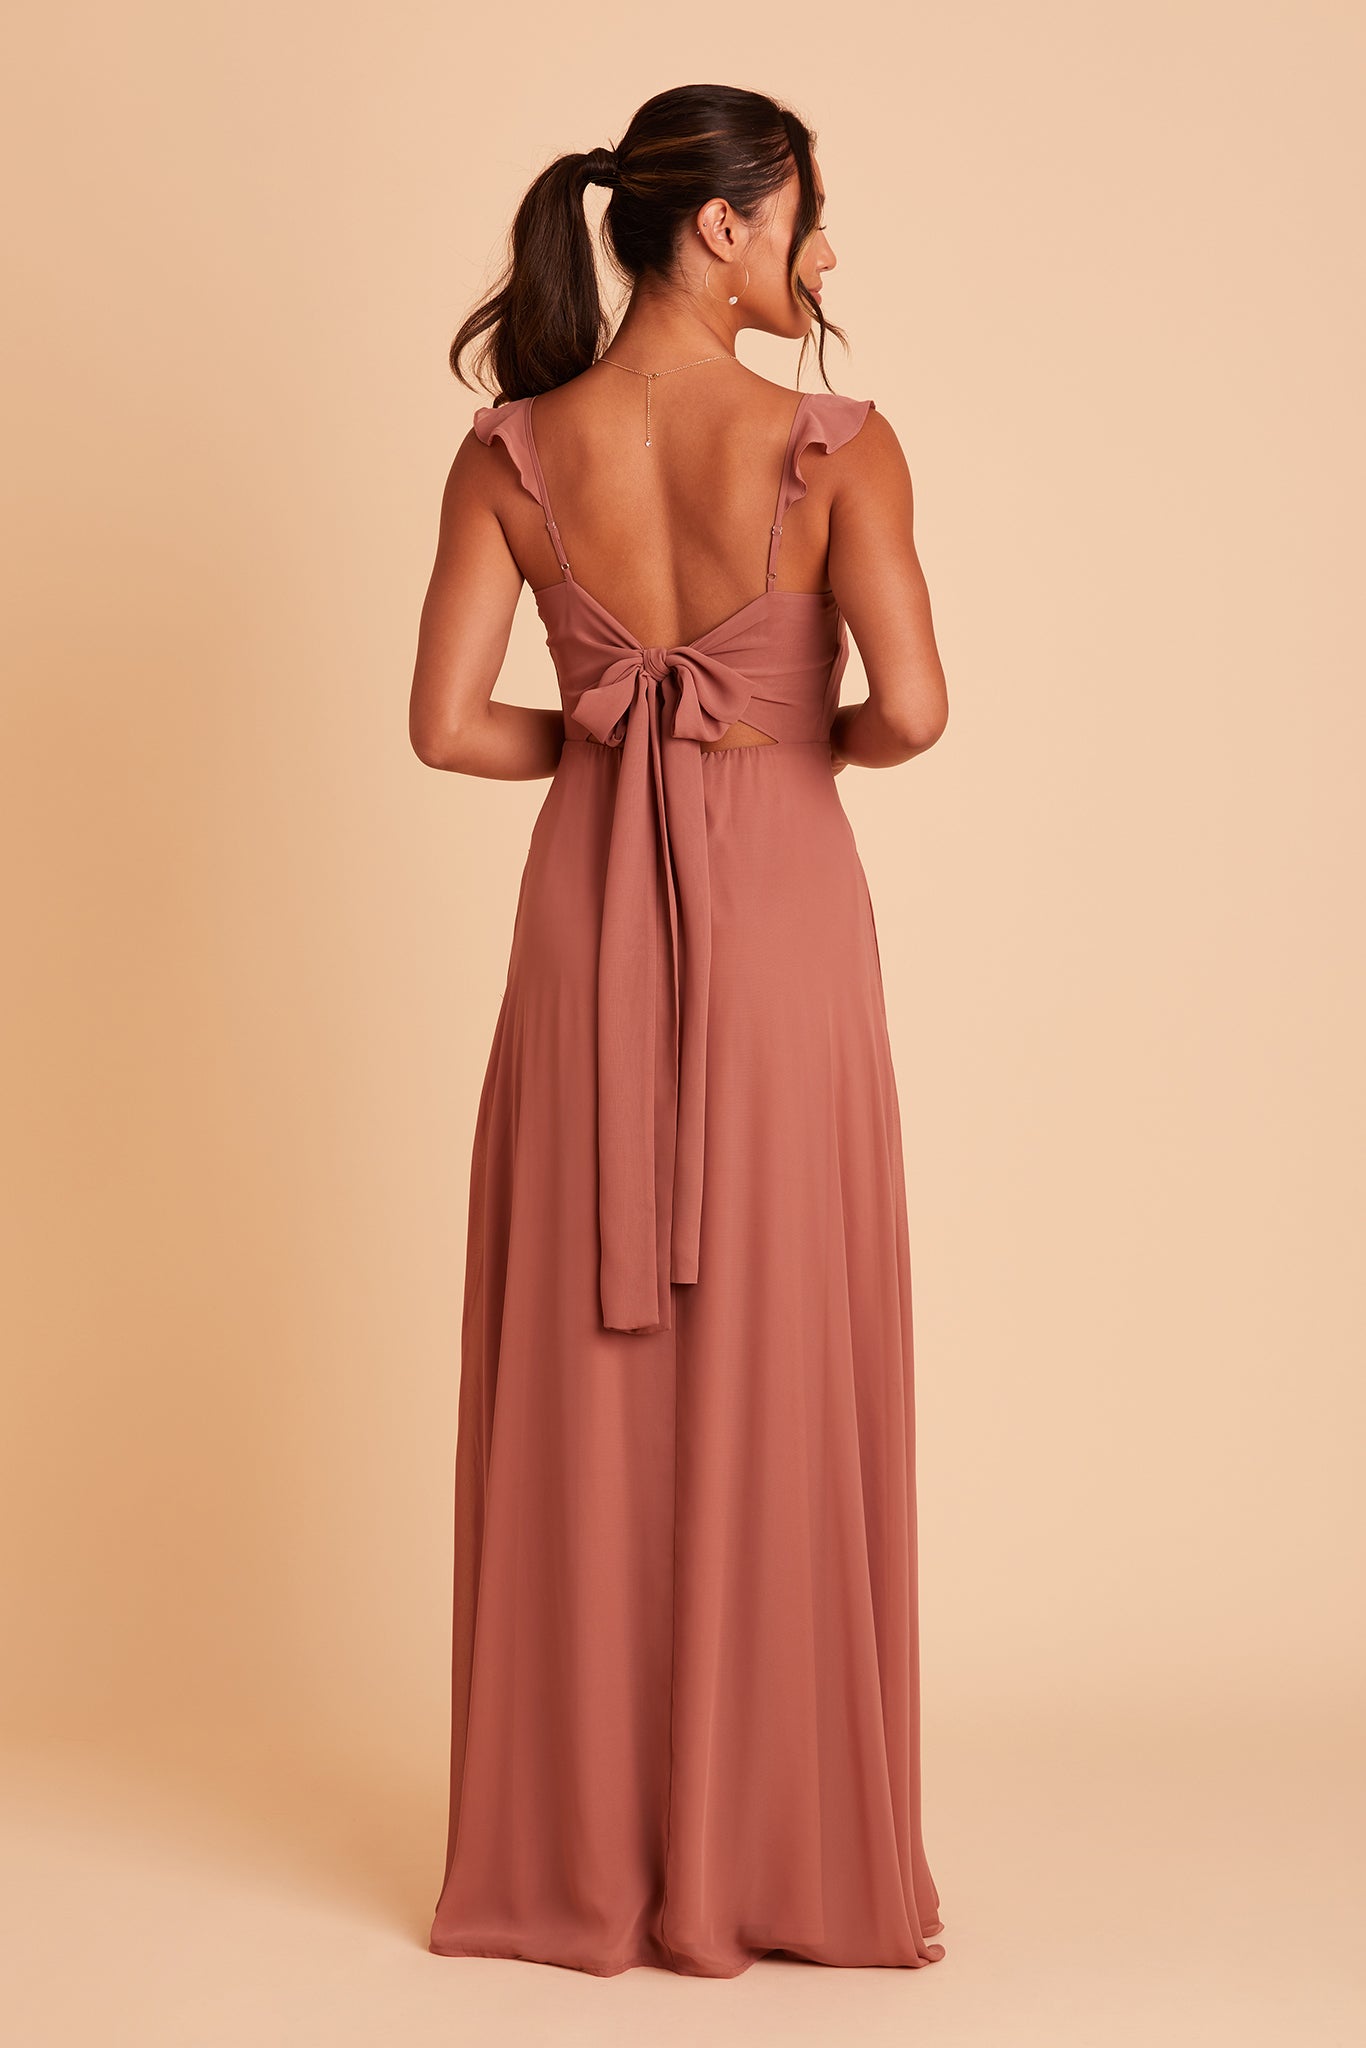 Doris bridesmaid dress with slit in desert rose chiffon by Birdy Grey, back view